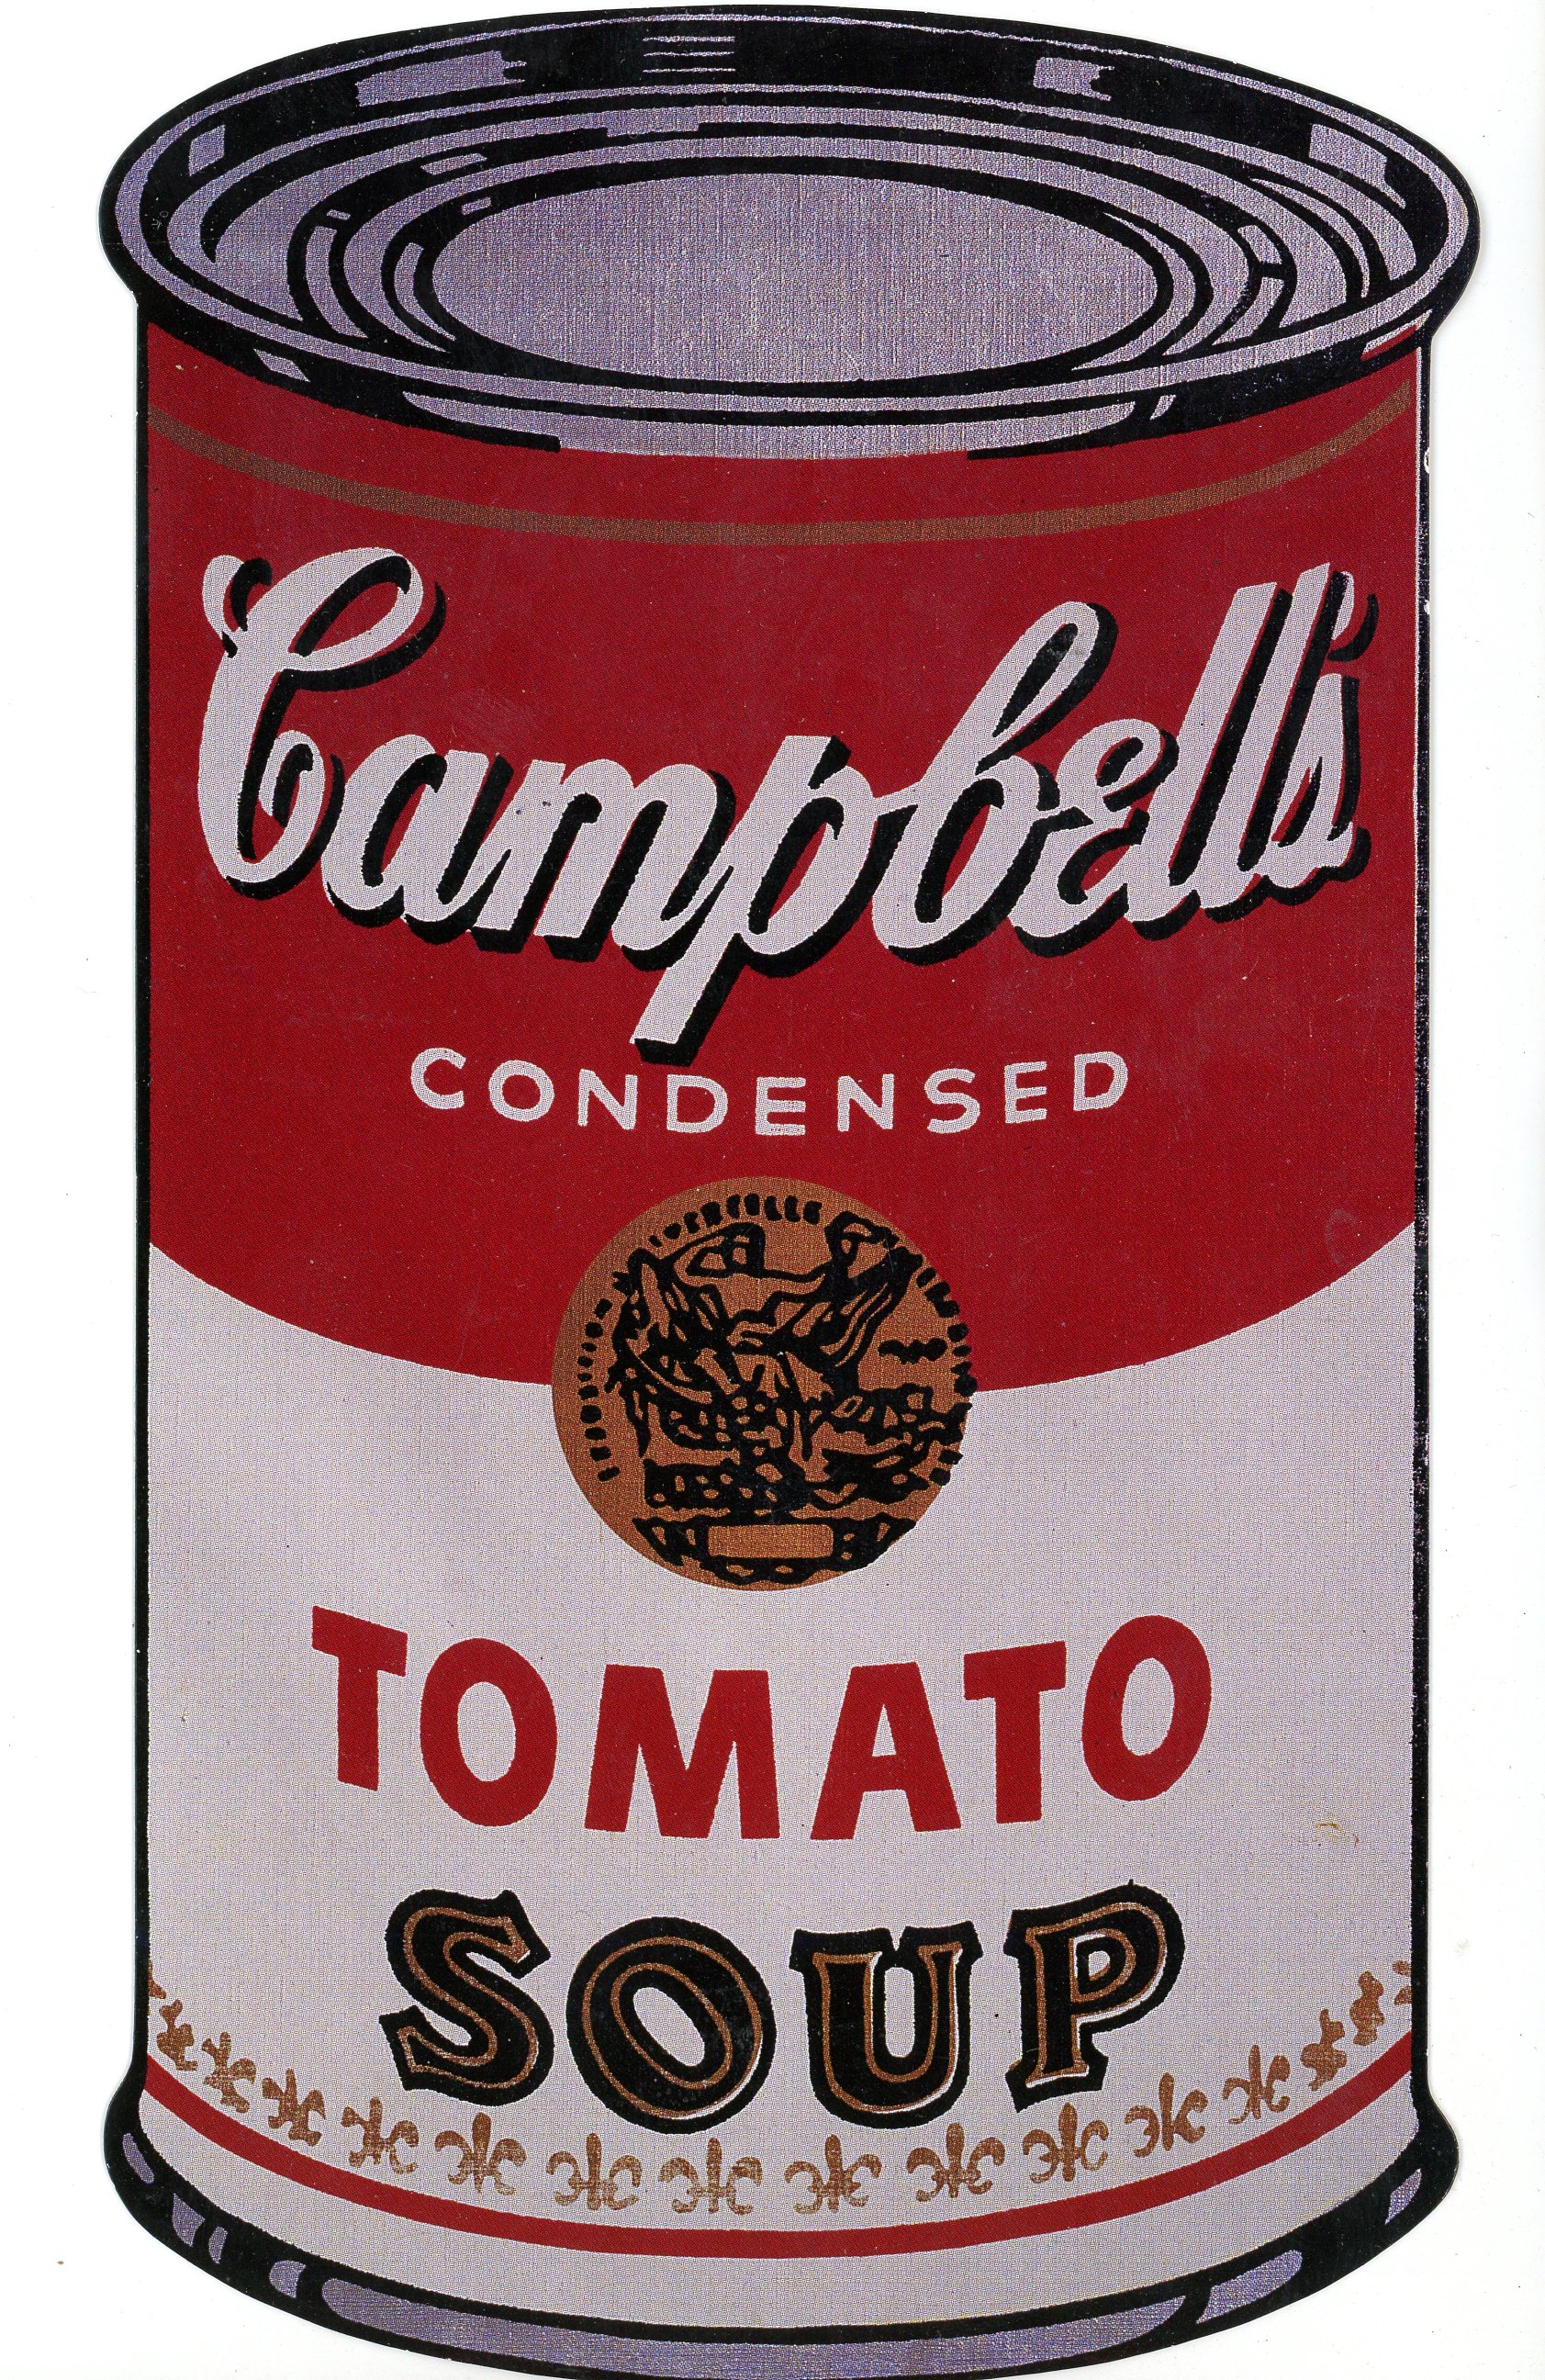 Gallery 98 | Andy Warhol, “Campbell's Soup Can,” Card for an